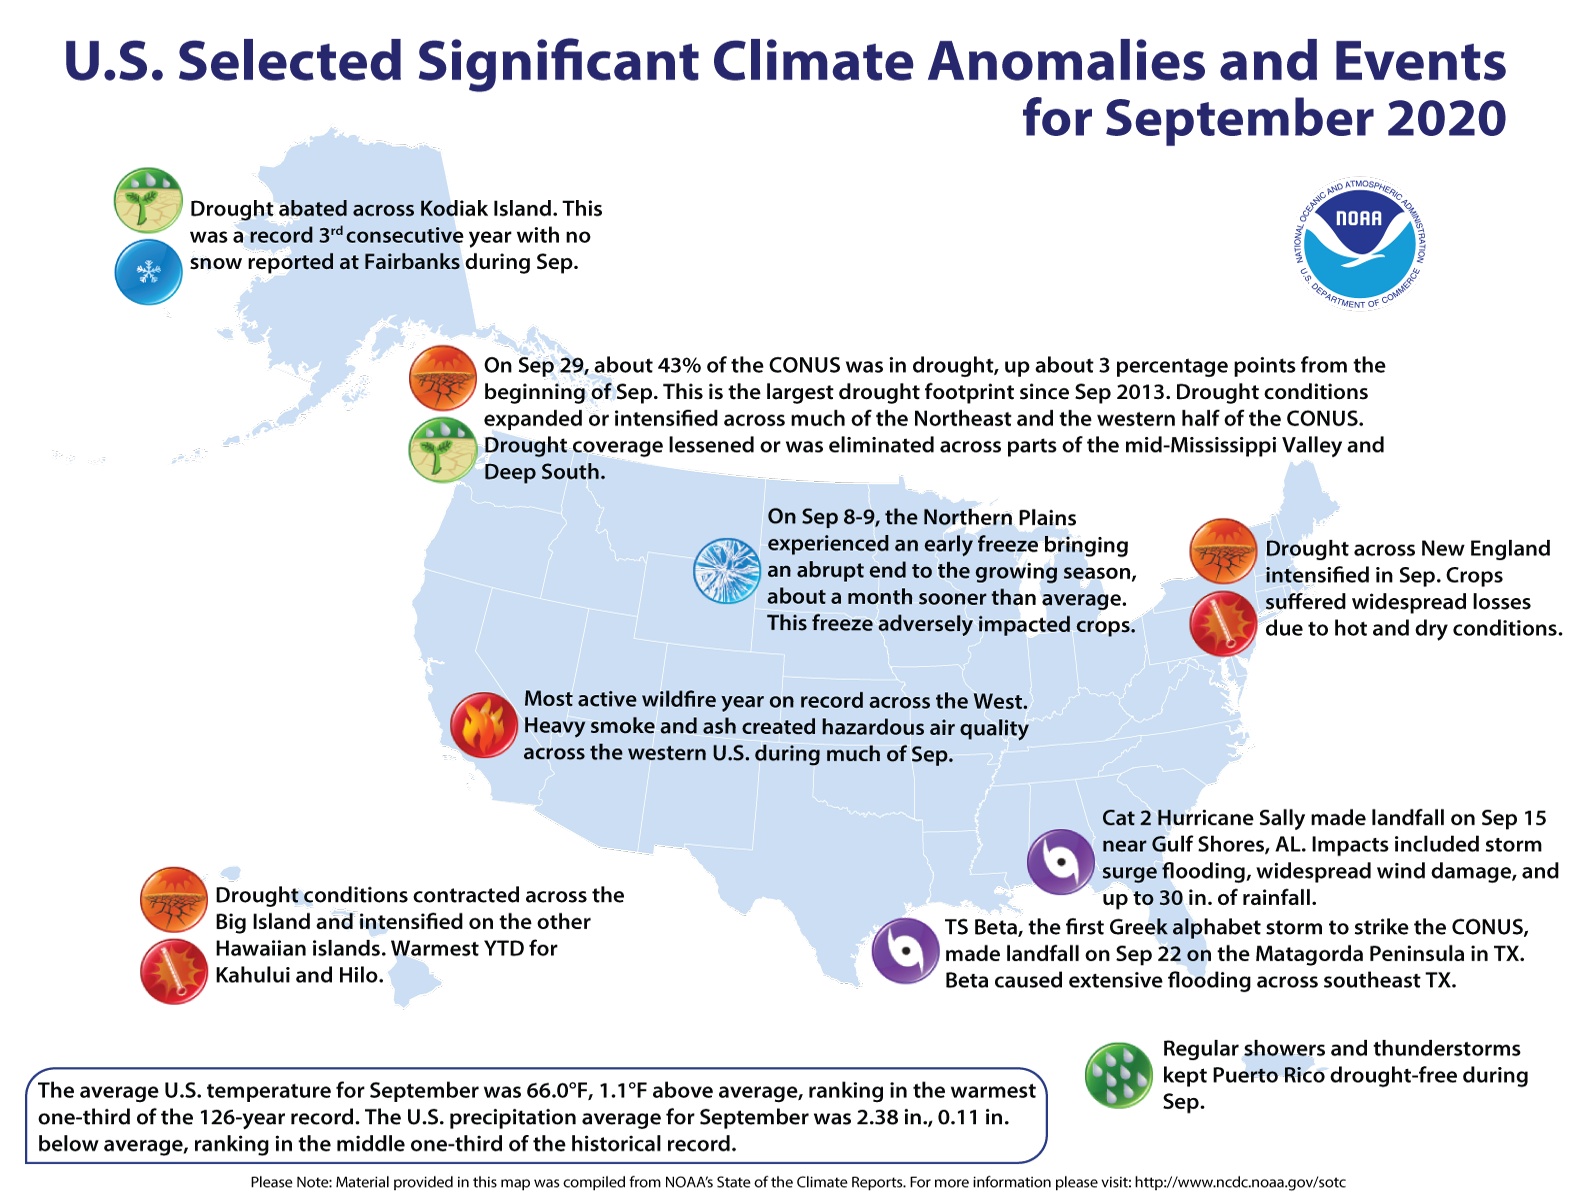 An annotated map of the United States showing notable climate and weather events that occurred across the country during September 2020. For text details, please visit http://bit.ly/USClimate202009.